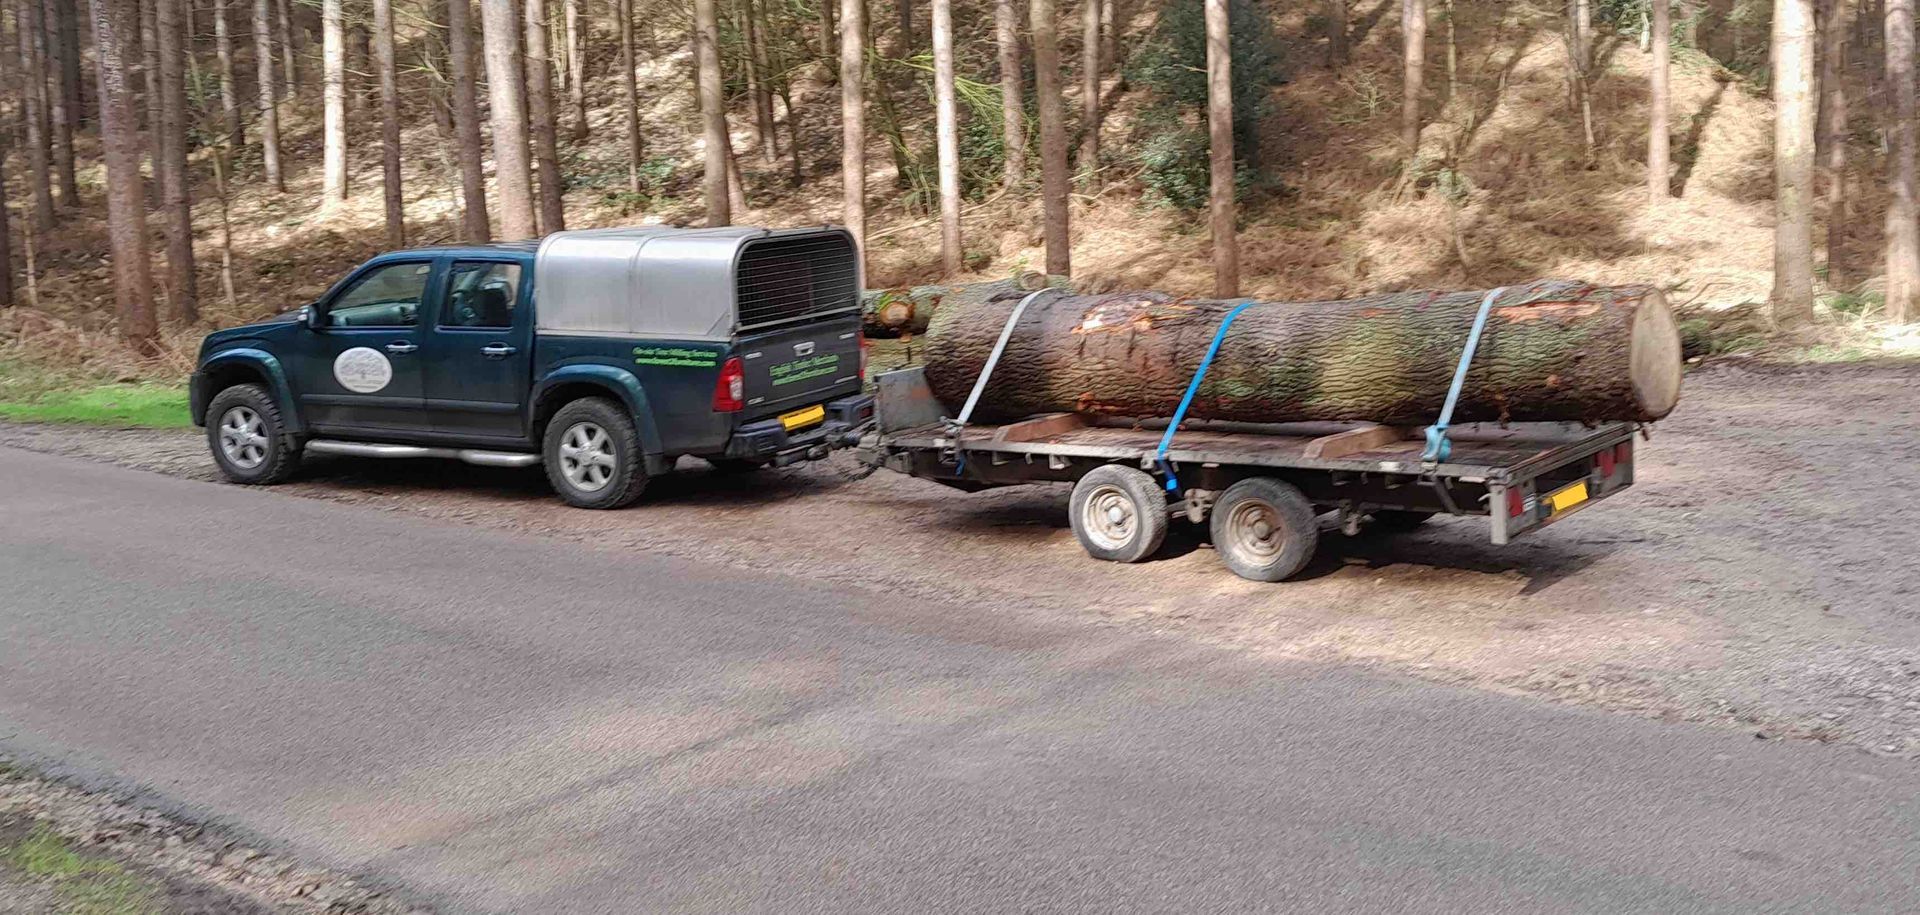 image showing two more trunk sections of the felled sweet chestnut tree loaded onto the trailer in the woodland